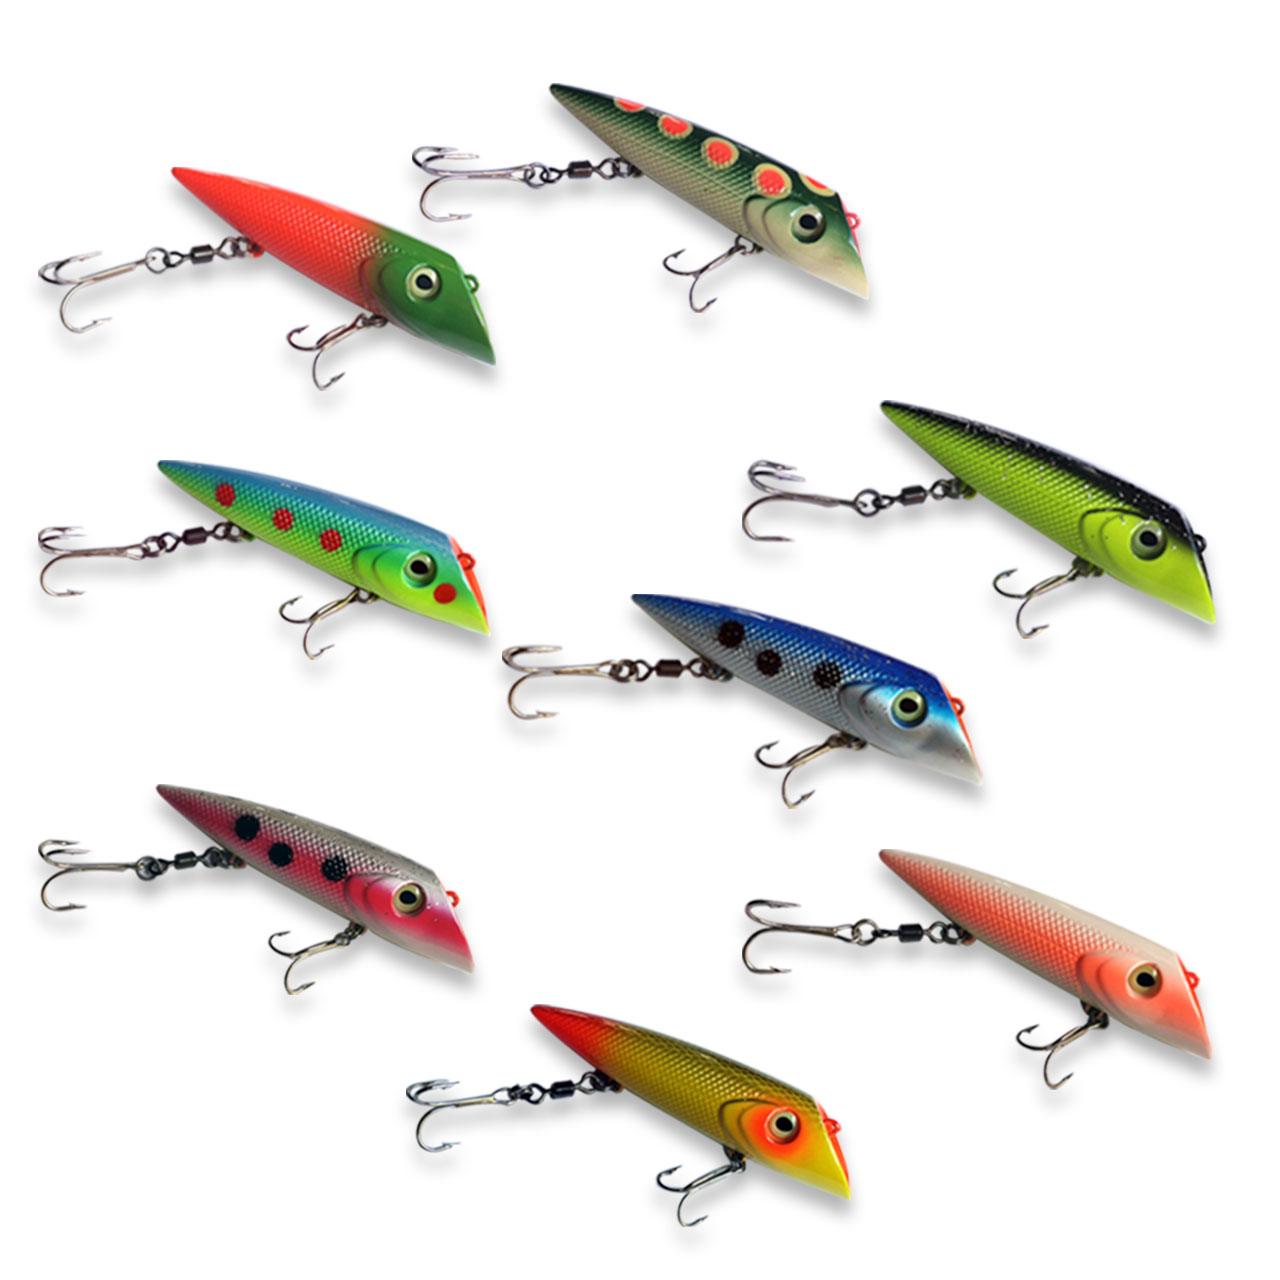 Rapala's Giant Lure - Hook, Line and Sinker - Guelph's #1 Tackle Store  Rapala's Giant Lure